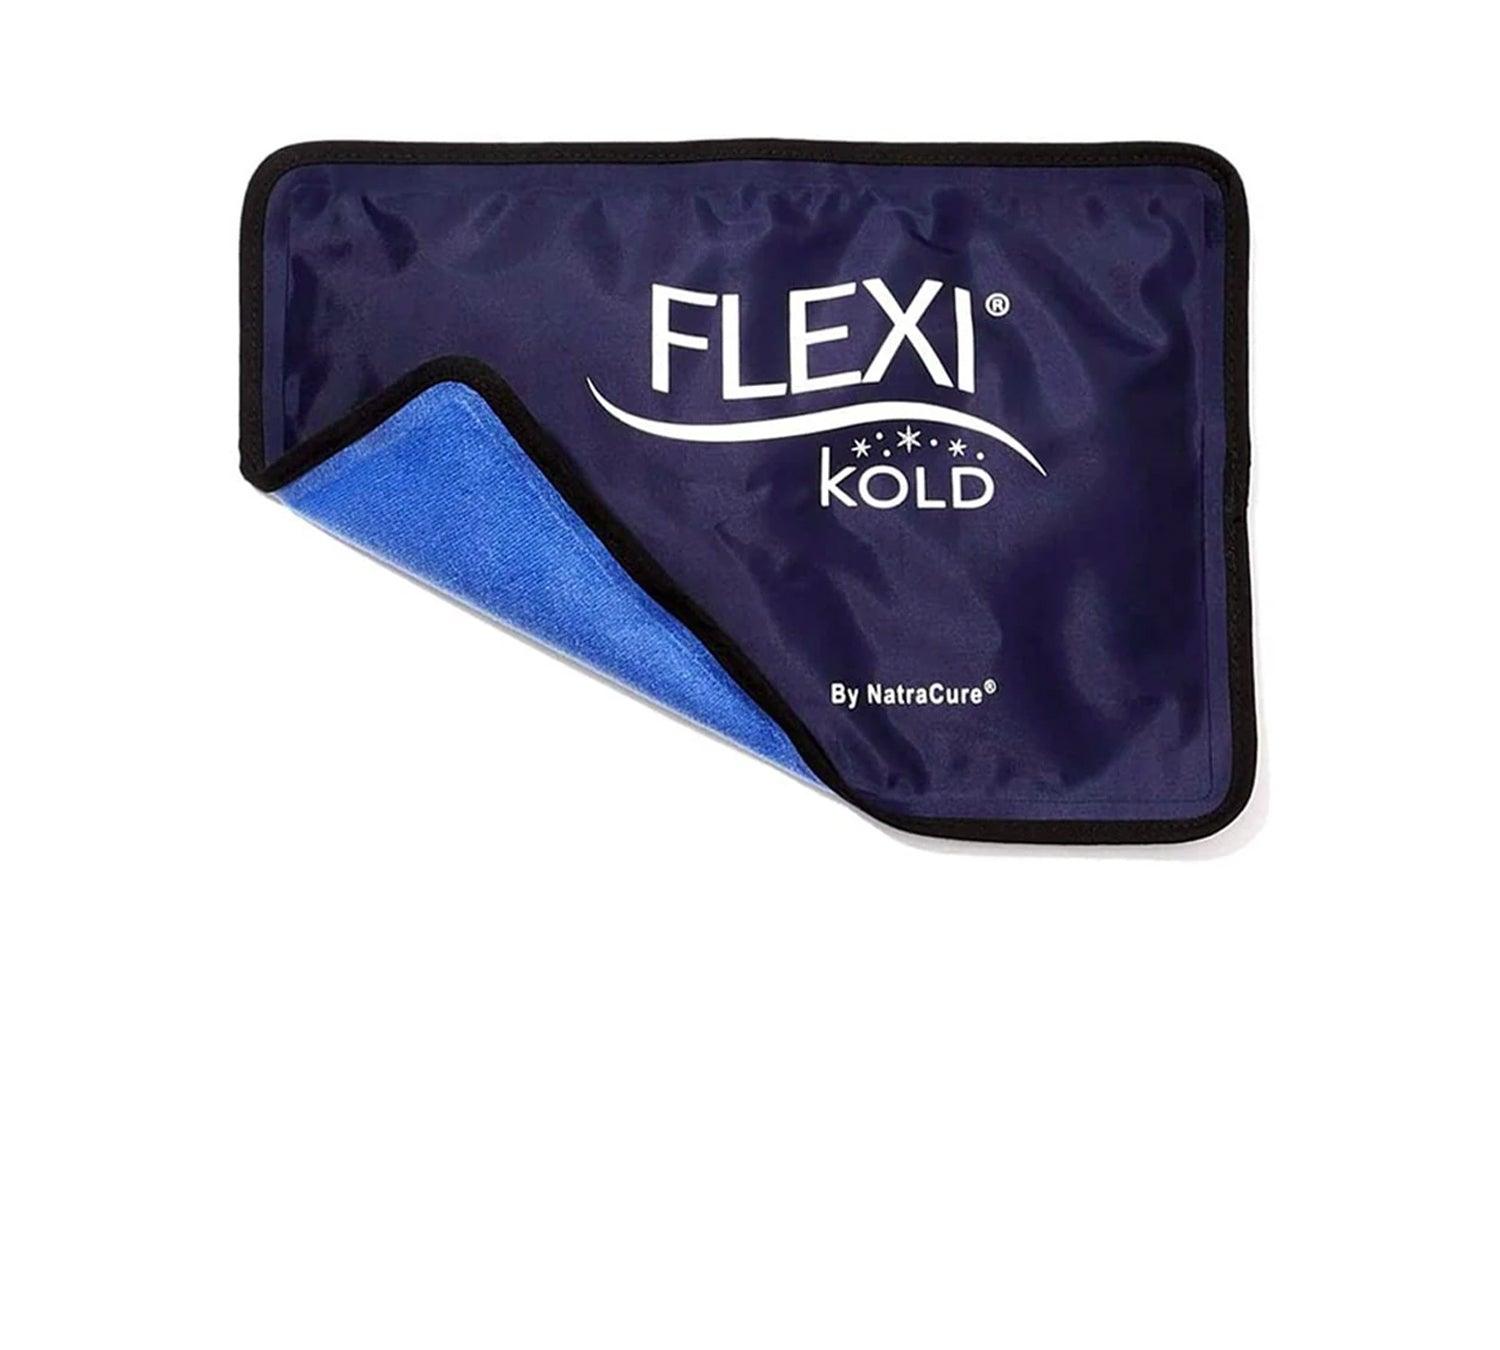 FlexiKold Gel Neck Ice Pack w/Straps (58 X 20 X 12.7 cm) - 6301 COLD-STRAP  - Professional Cold Pack